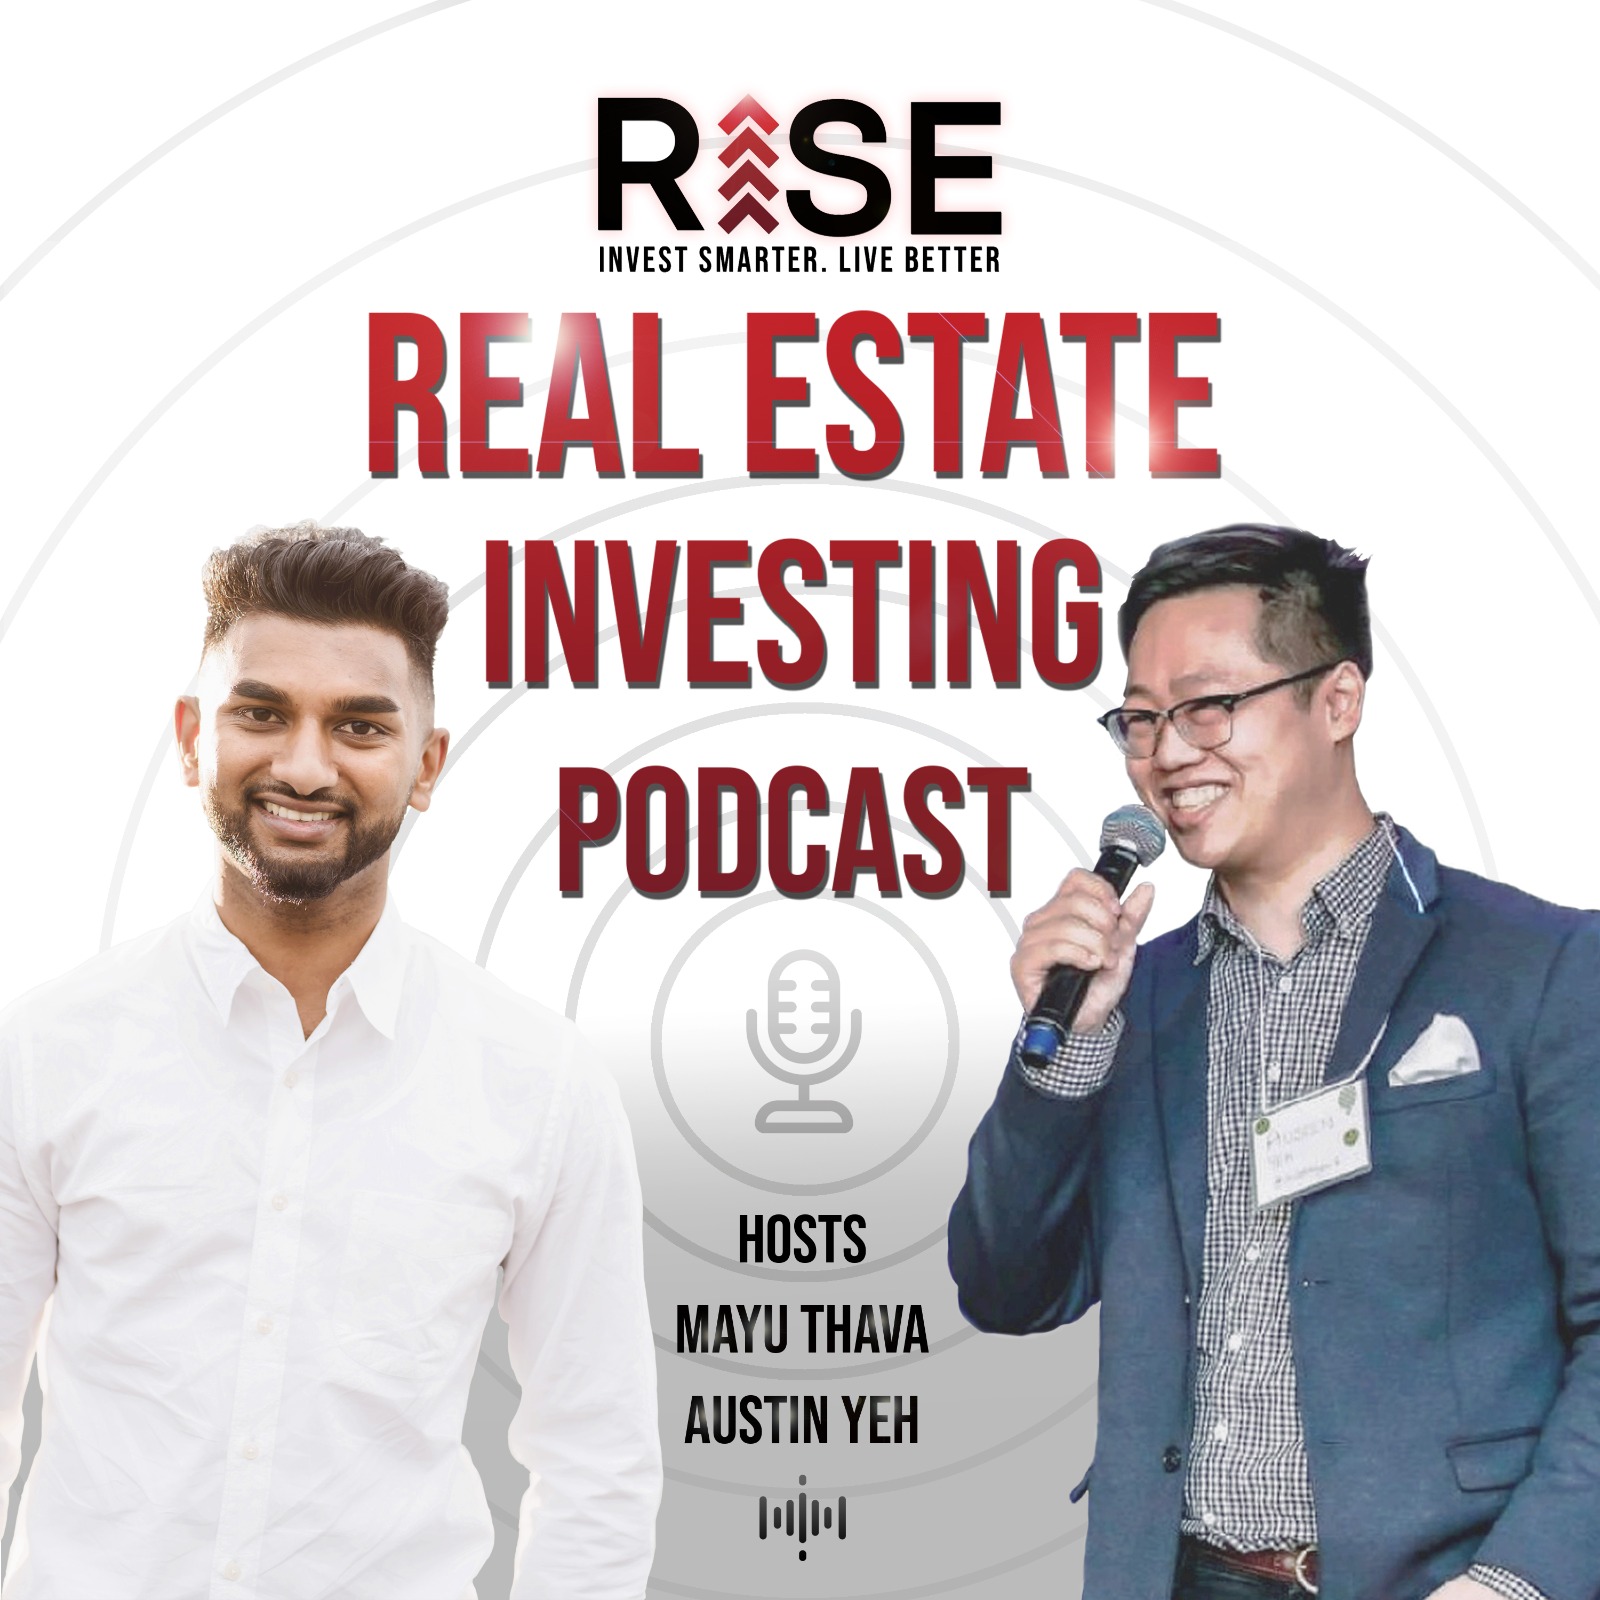 Rise Real Estate Investing Podcast